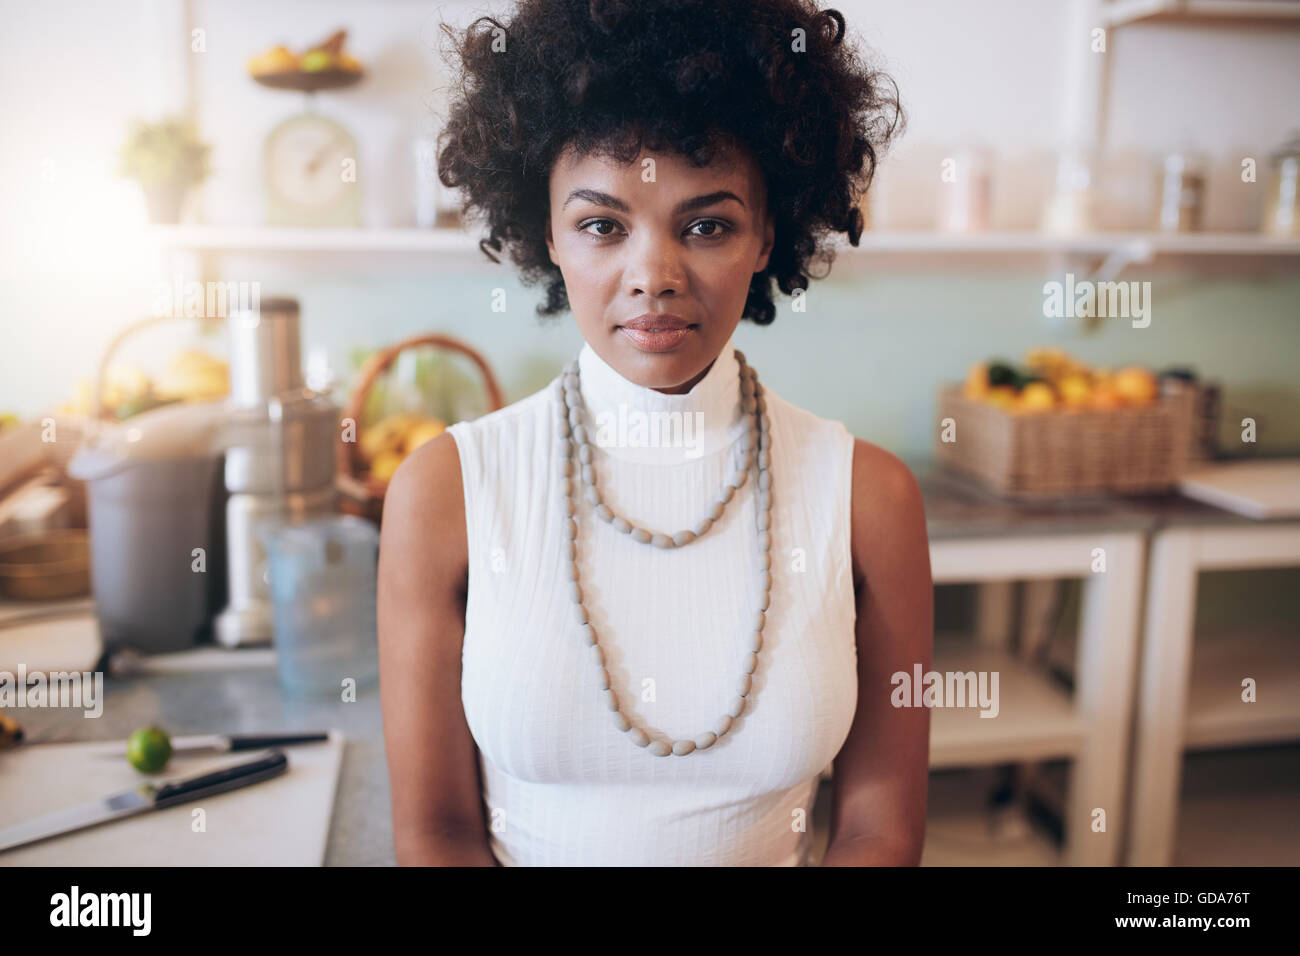 Closeup portrait of young african woman standing at juice bar. Attractive female looking at camera. Stock Photo